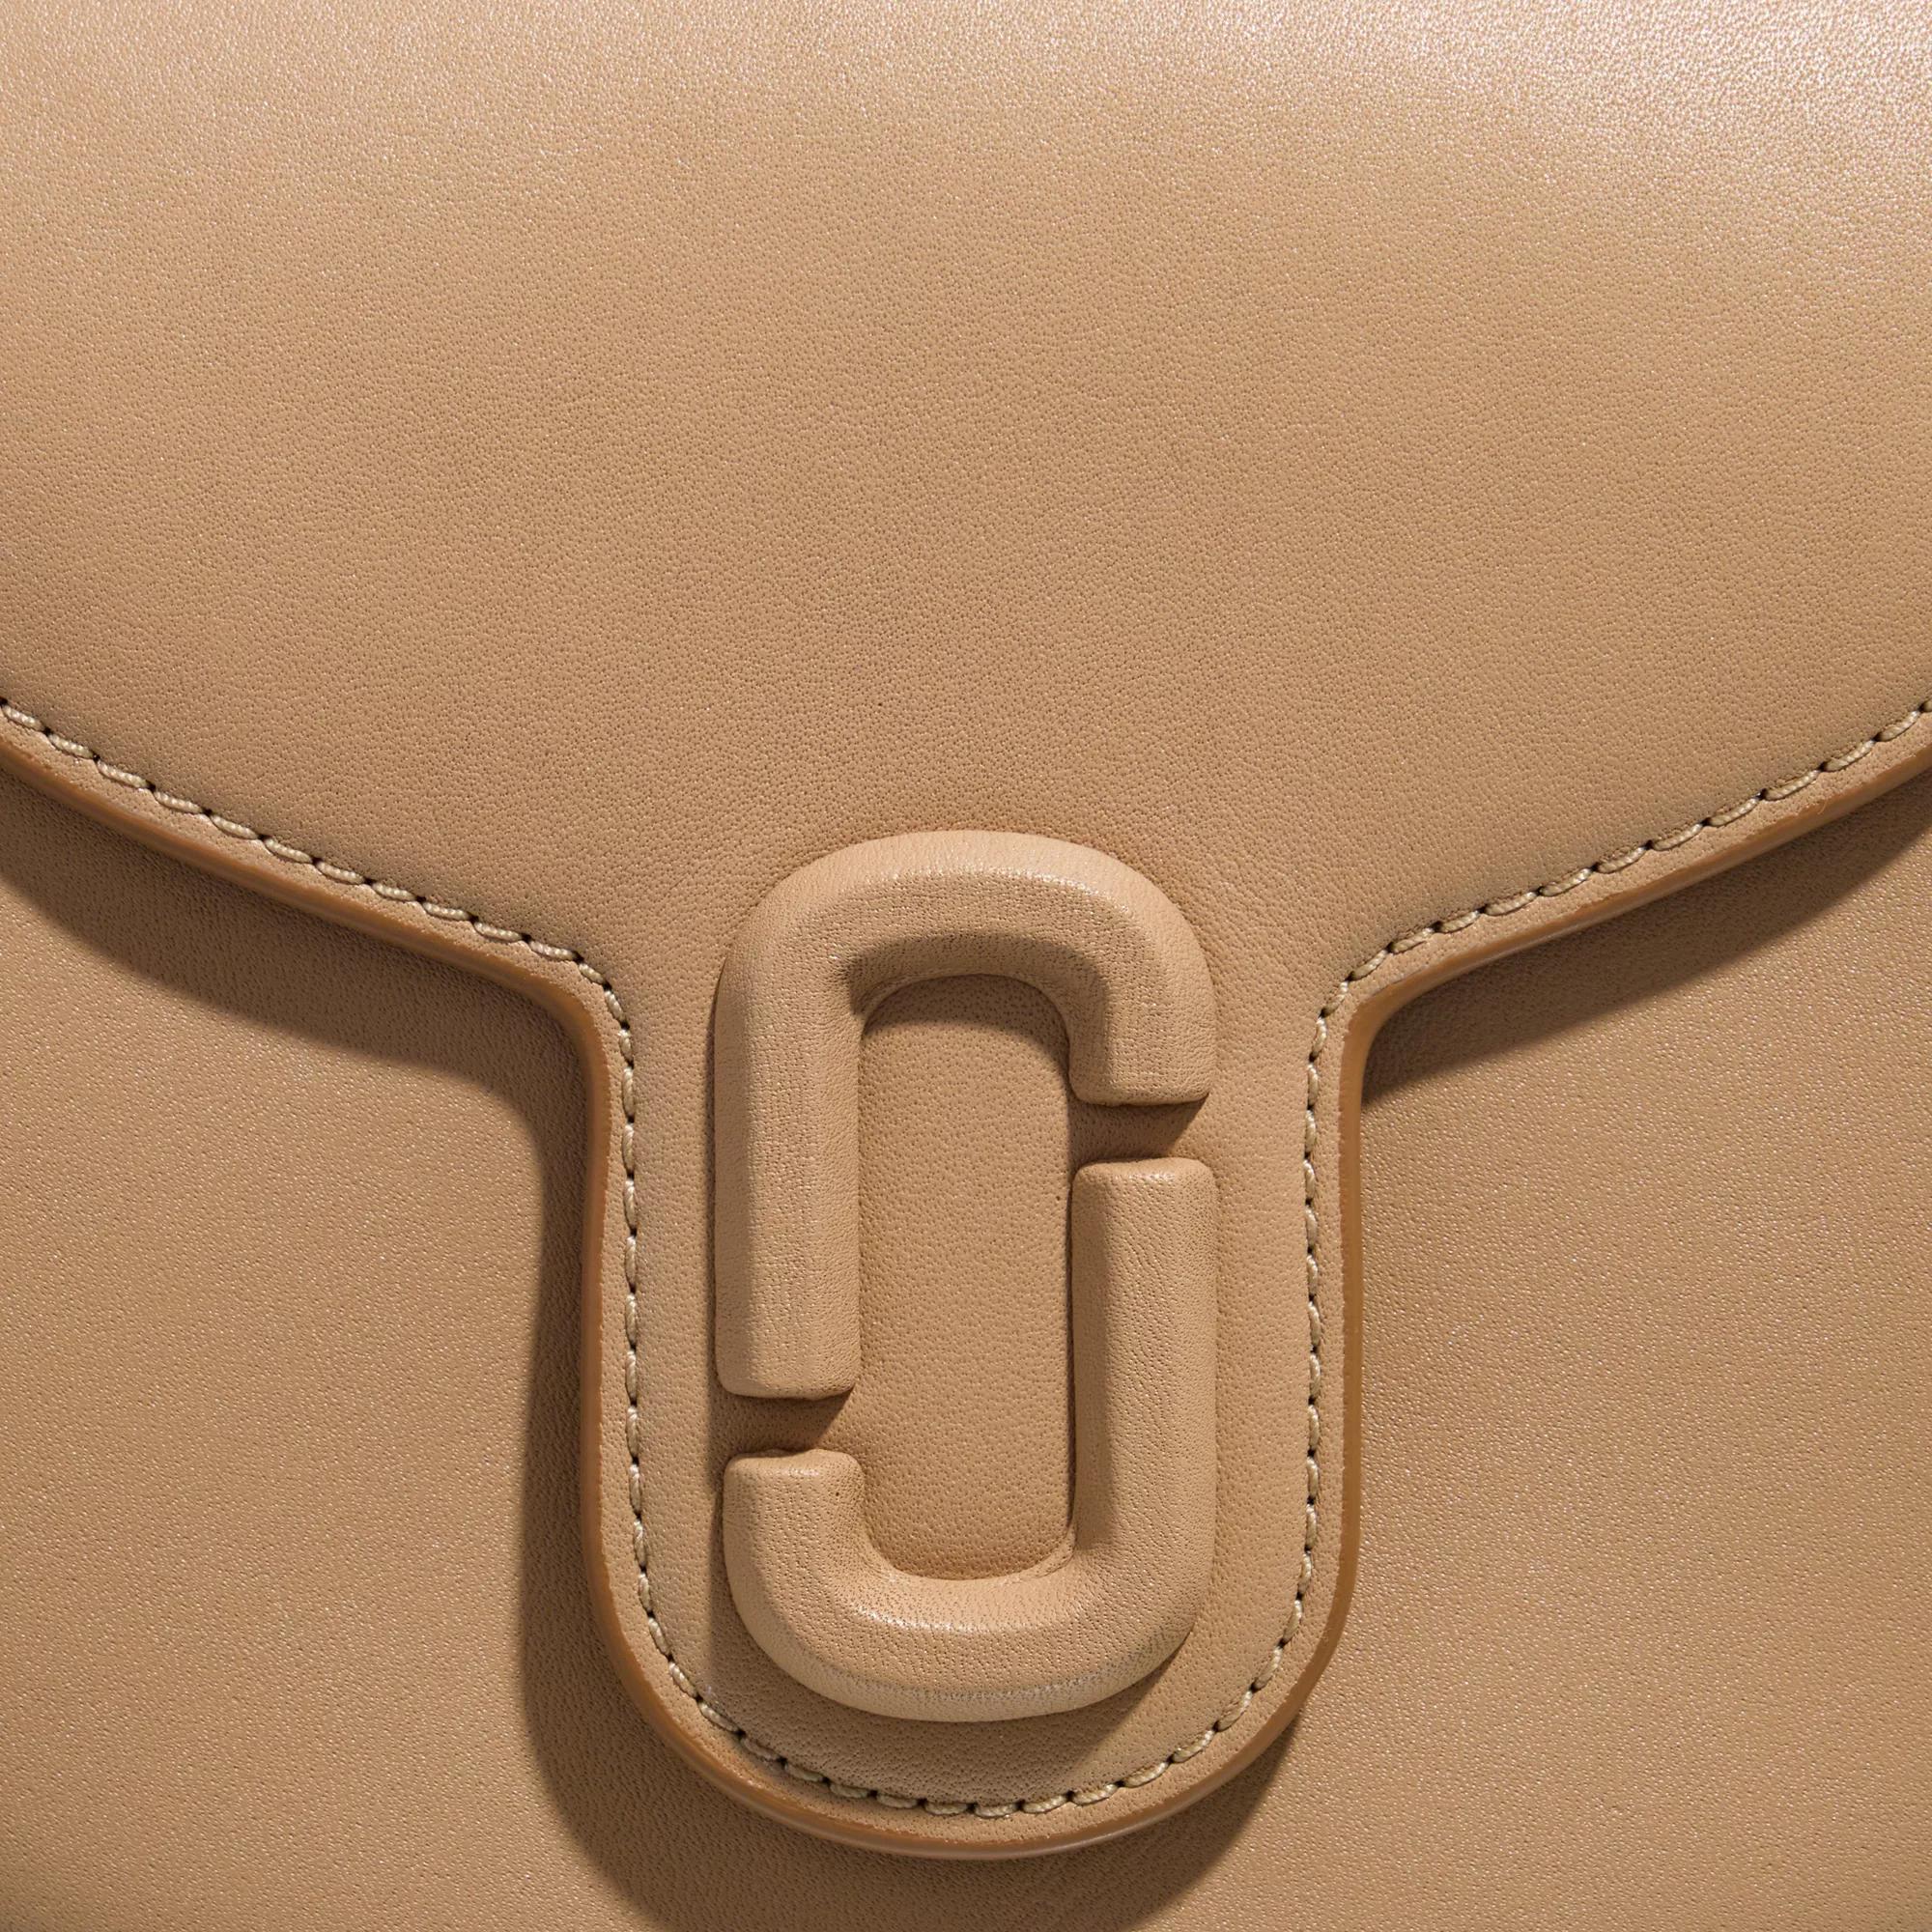 Marc Jacobs Crossbody bags The Small Saddle Bag in beige